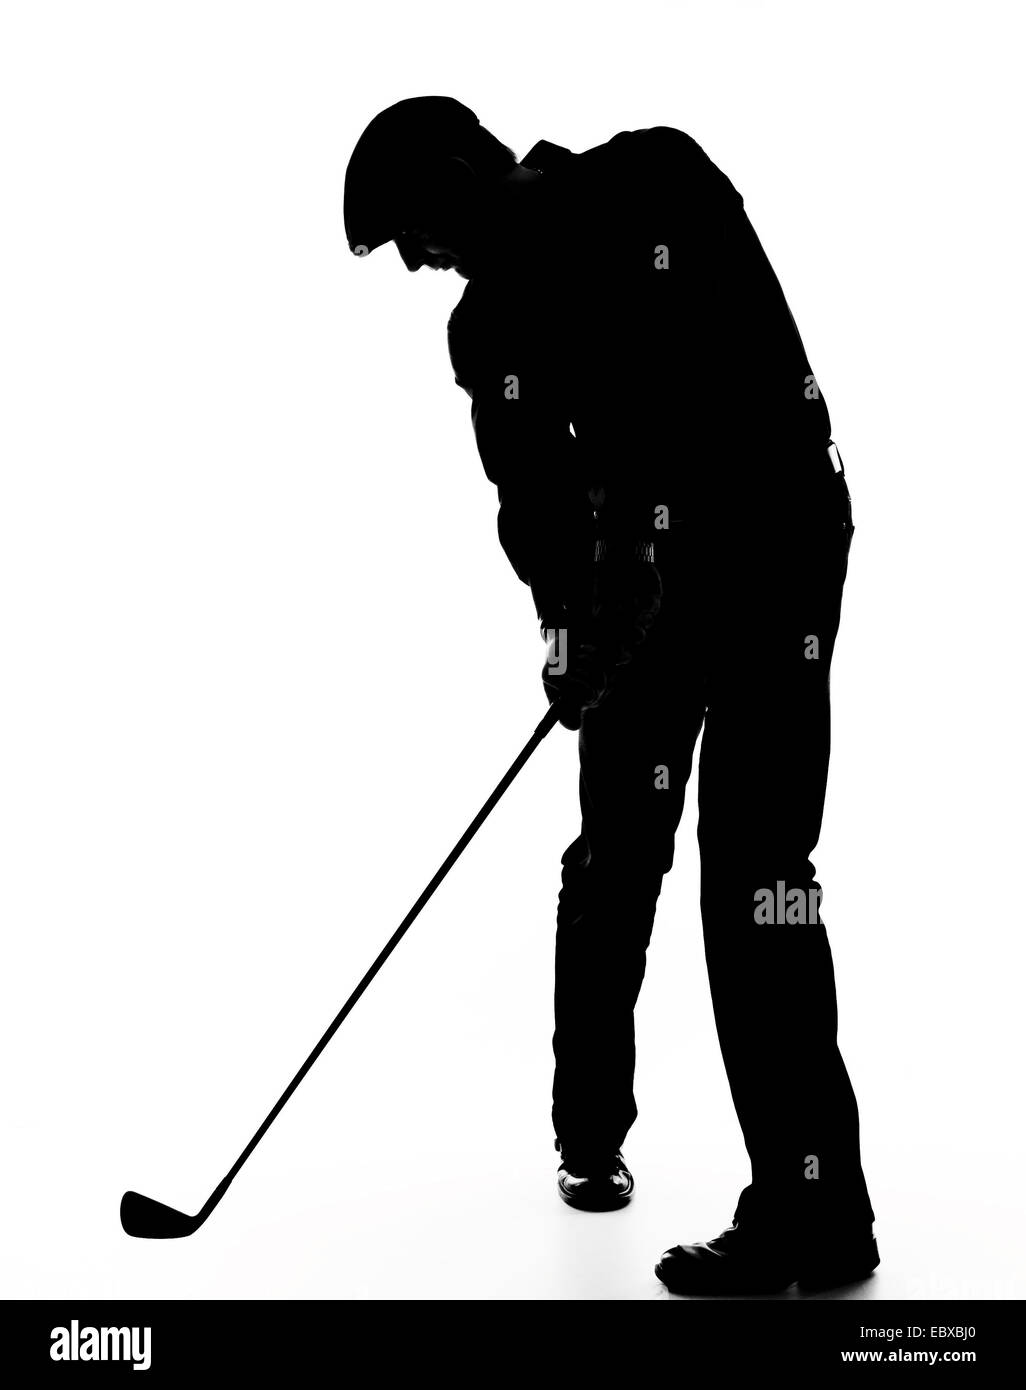 silhouette of a golfer Stock Photo